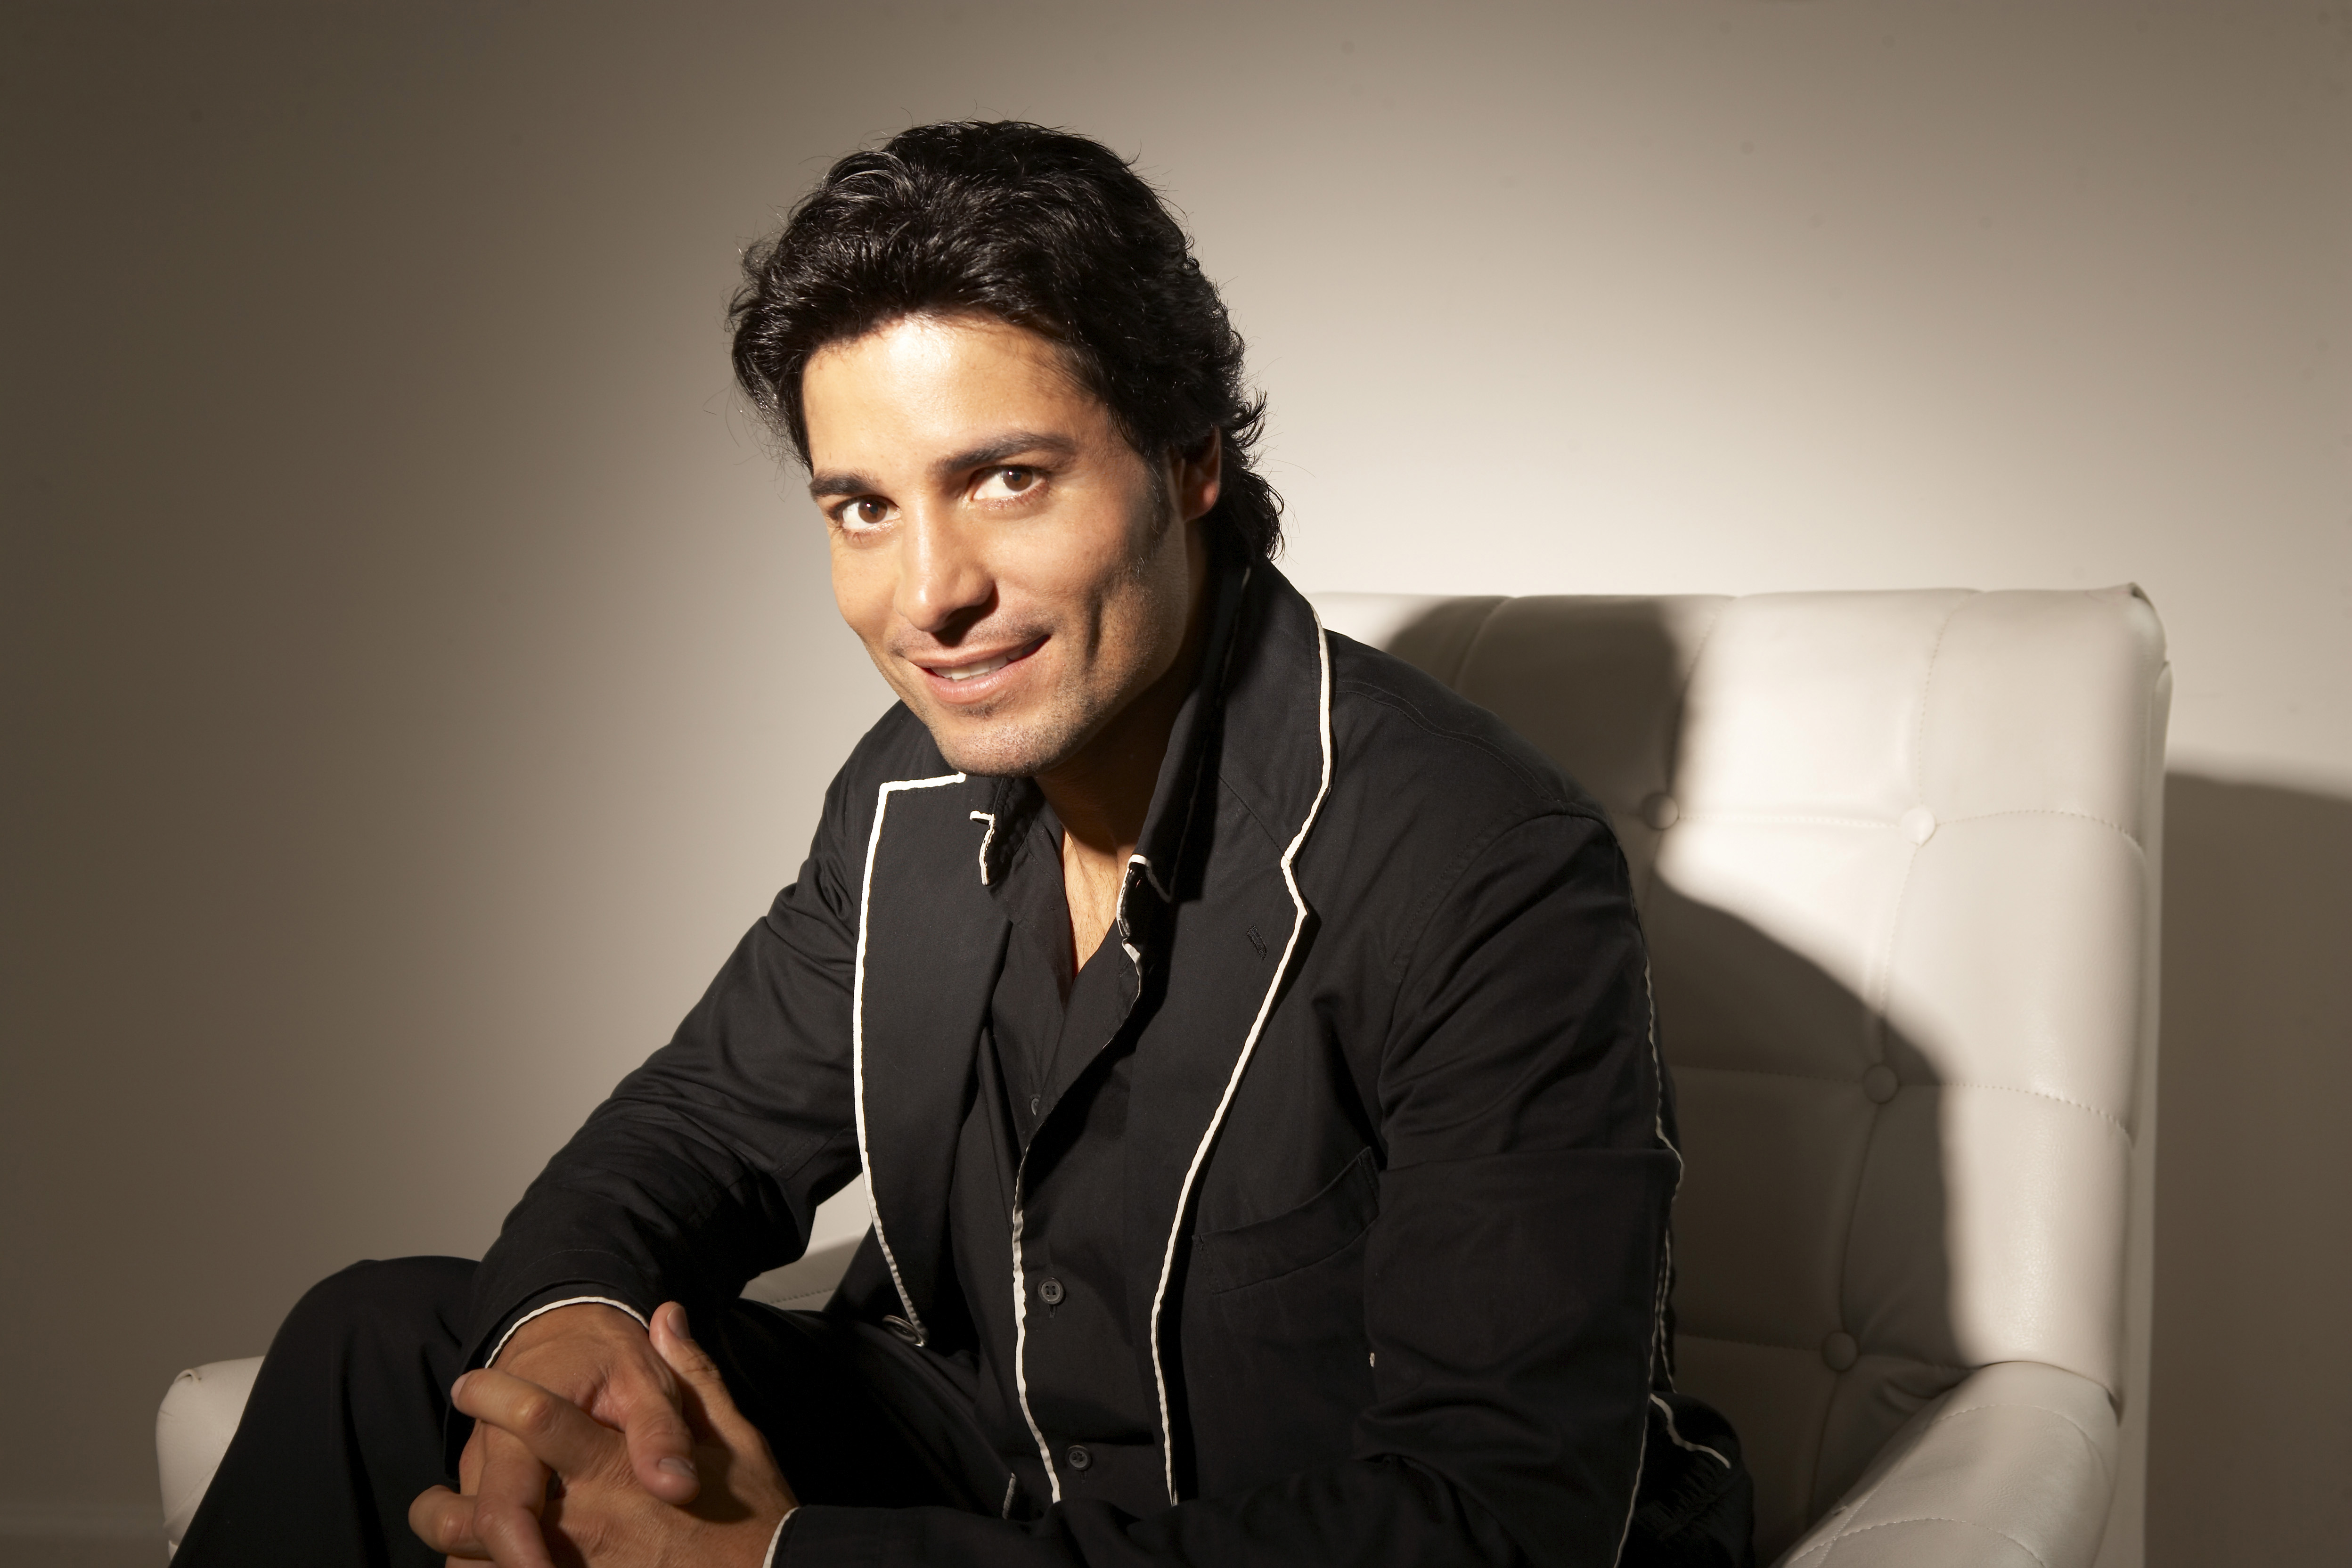 Chayanne's profile including the latest music, albums, songs, music vi...